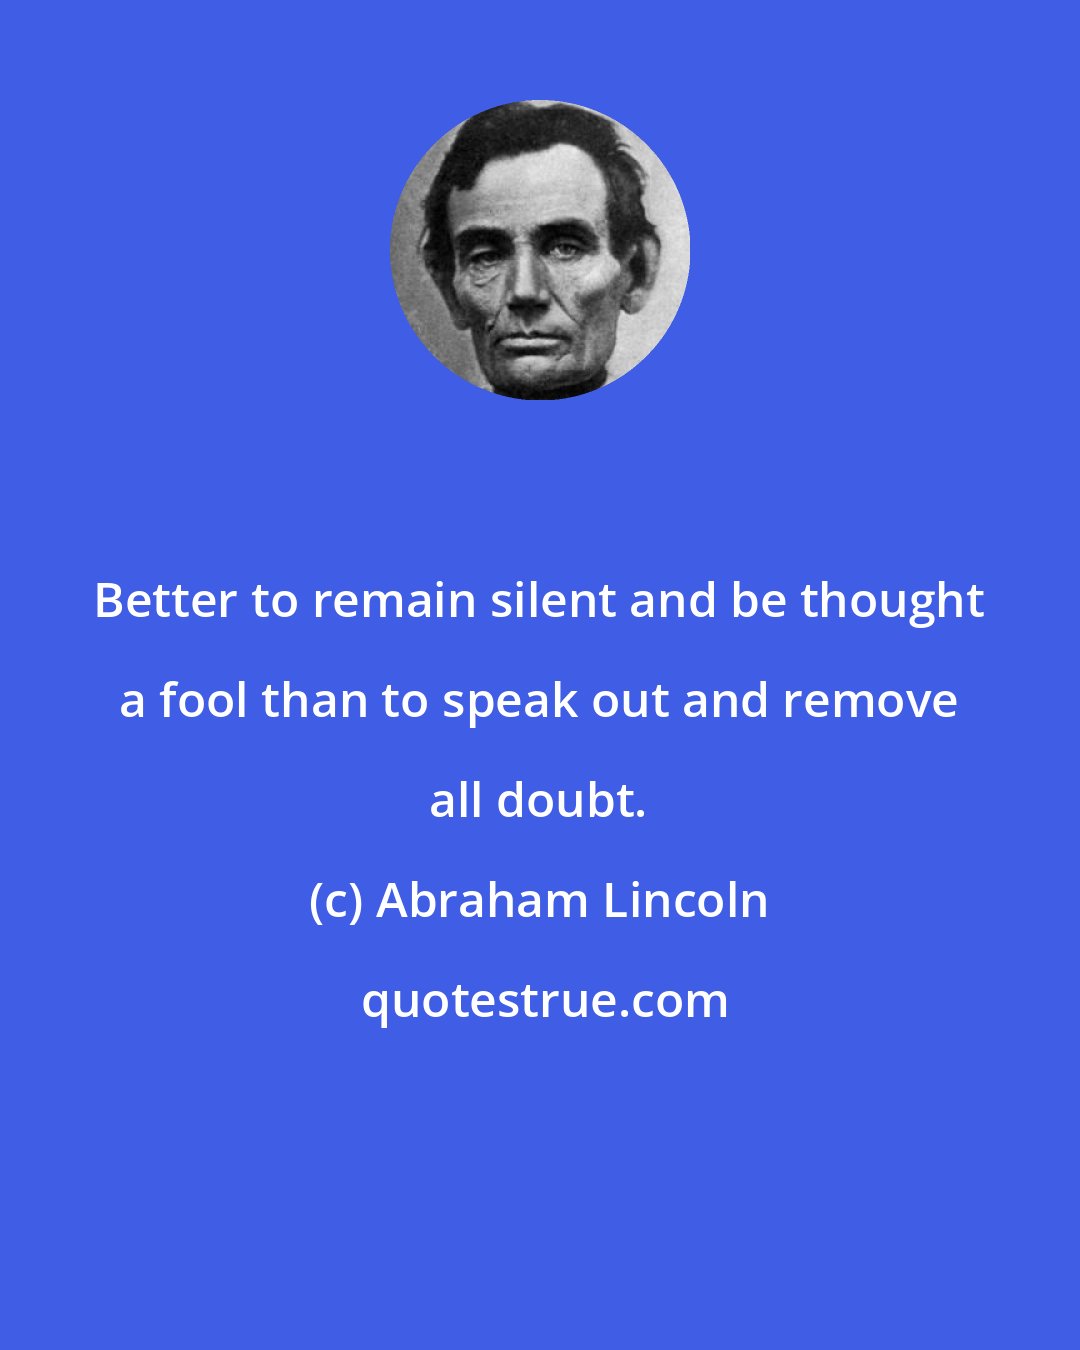 Abraham Lincoln: Better to remain silent and be thought a fool than to speak out and remove all doubt.